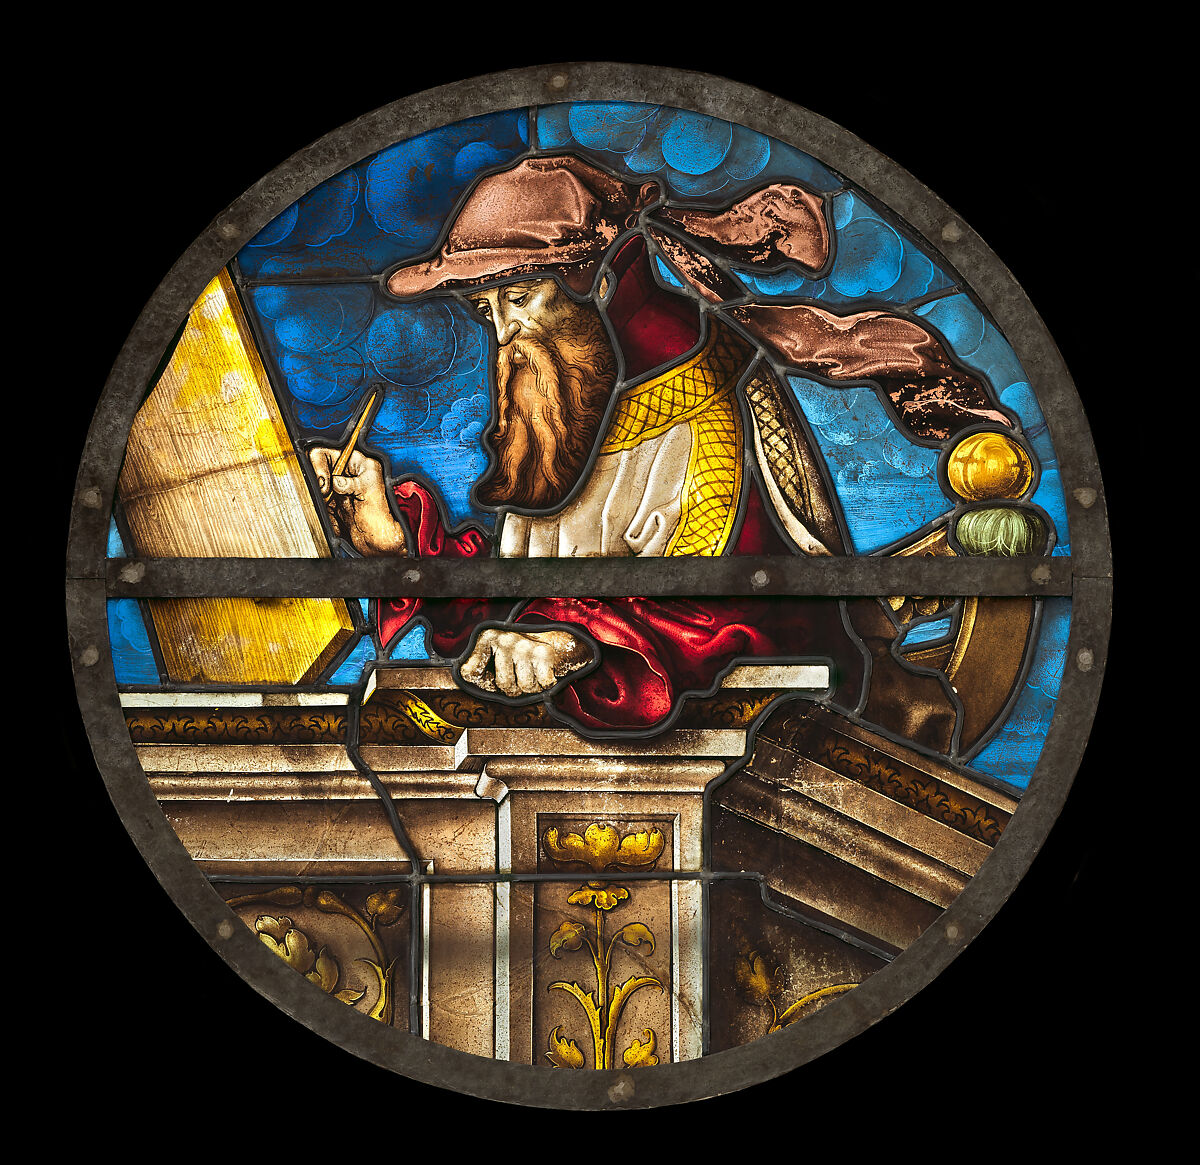 The Prophet Isaiah, Valentin Bousch (French, active 1514–41, died 1541), Stained glass, French, Lorraine, Metz 